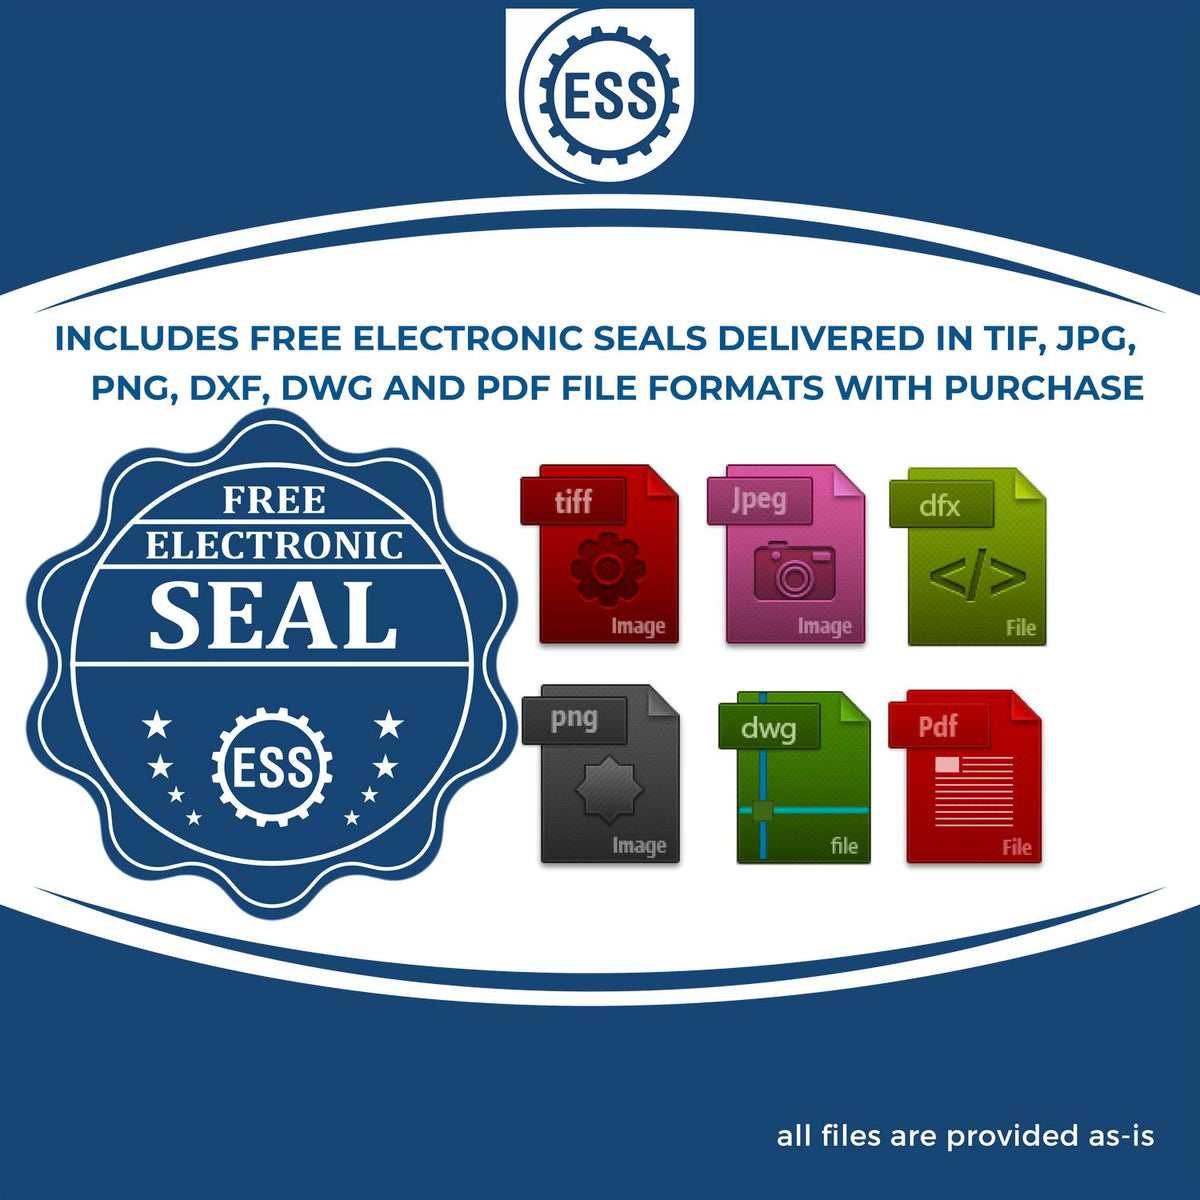 An infographic for the free electronic seal for the Long Reach Texas PE Seal illustrating the different file type icons such as DXF, DWG, TIF, JPG and PNG.